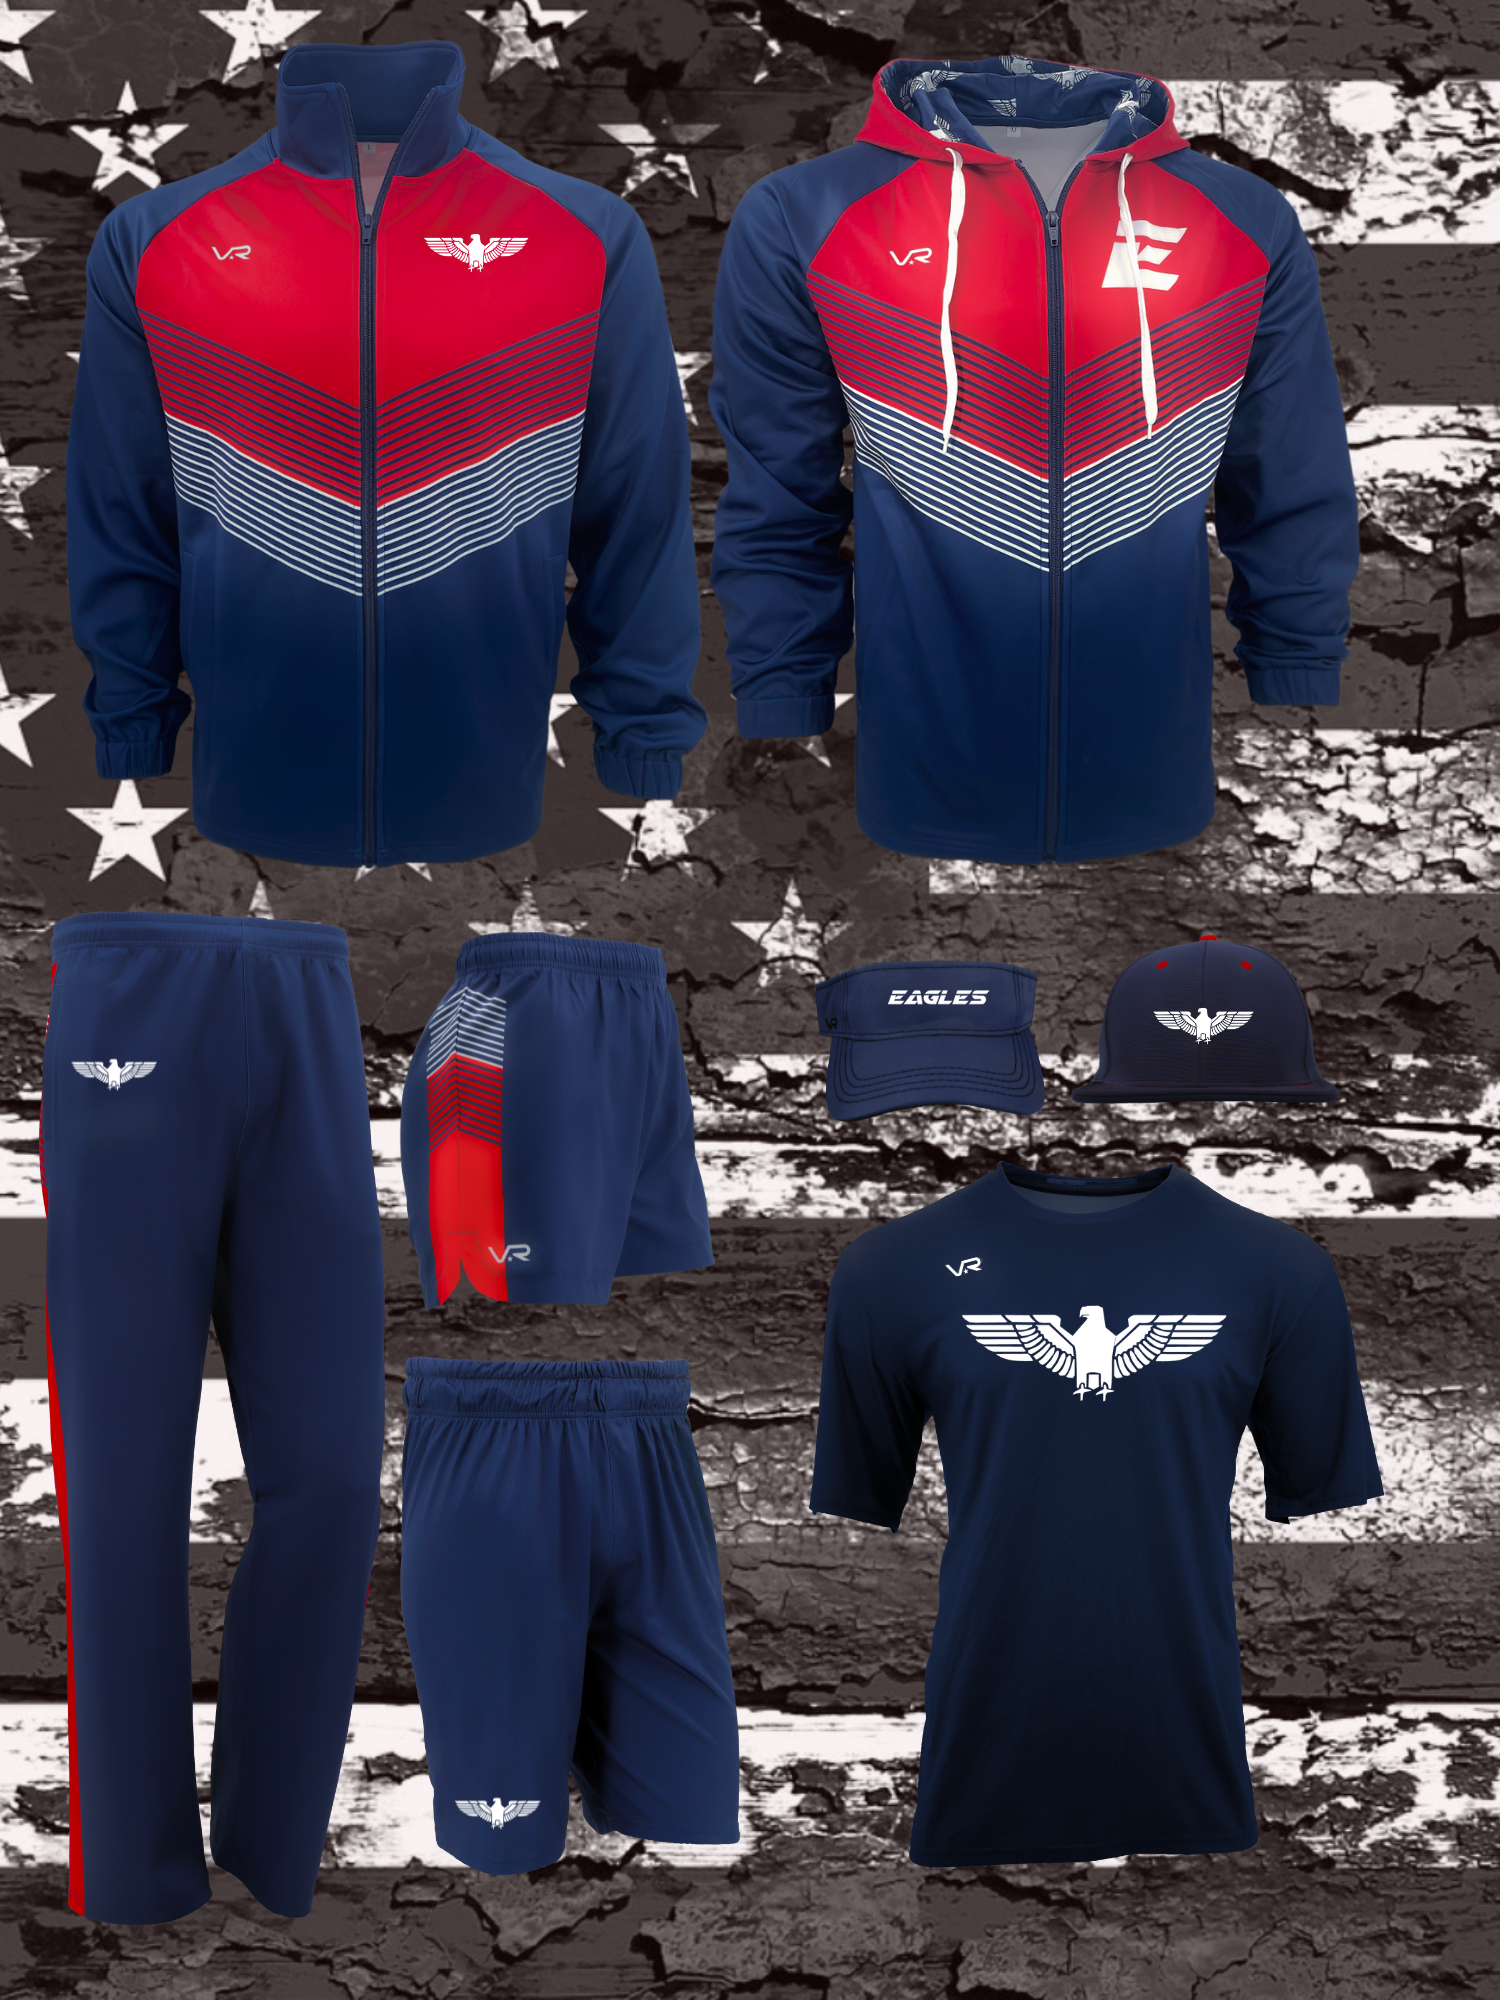 Bronze Team Package for Slowpitch Softball Teams showing Custom Sublimated Uniforms and Bat Pack